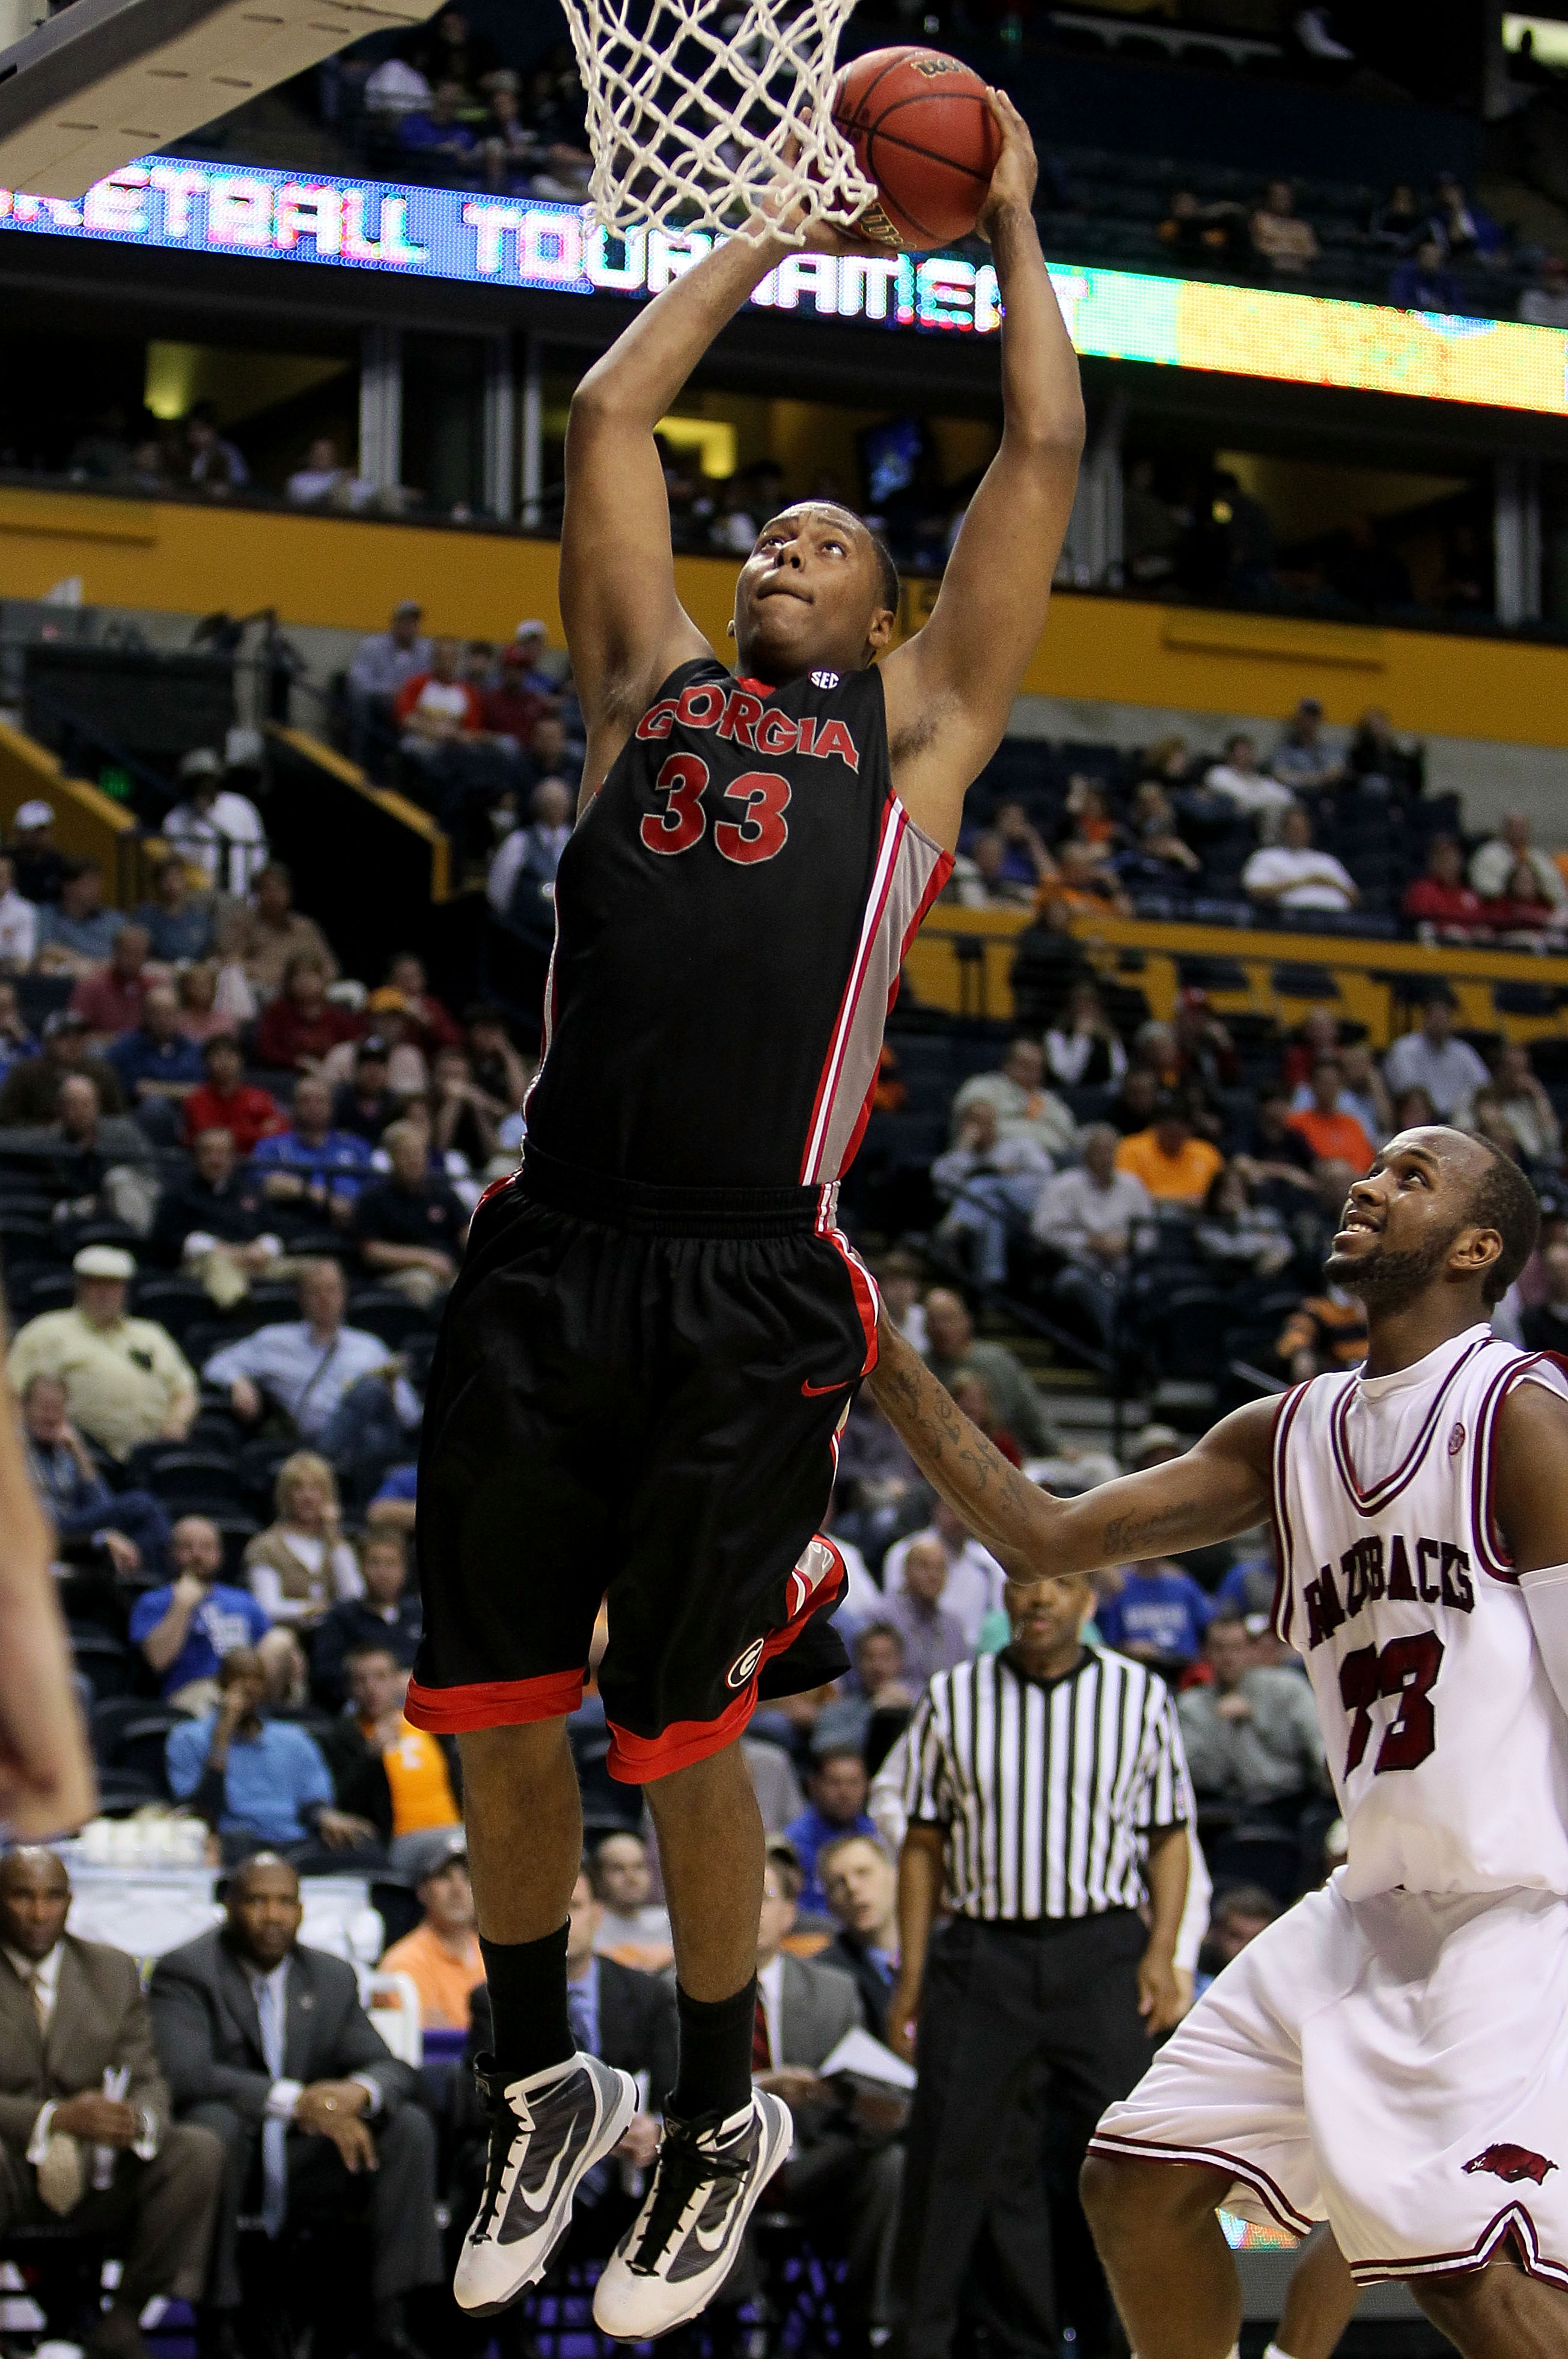 NASHVILLE, TN - MARCH 11:  Trey Thompkins #33 of the Georgia Bulldogs goes up for a dunk attempt against the Arkanasas Razorbacks during the first round of the SEC Men's Basketball Tournament at the Bridgestone Arena on March 11, 2010 in Nashville, Tennes